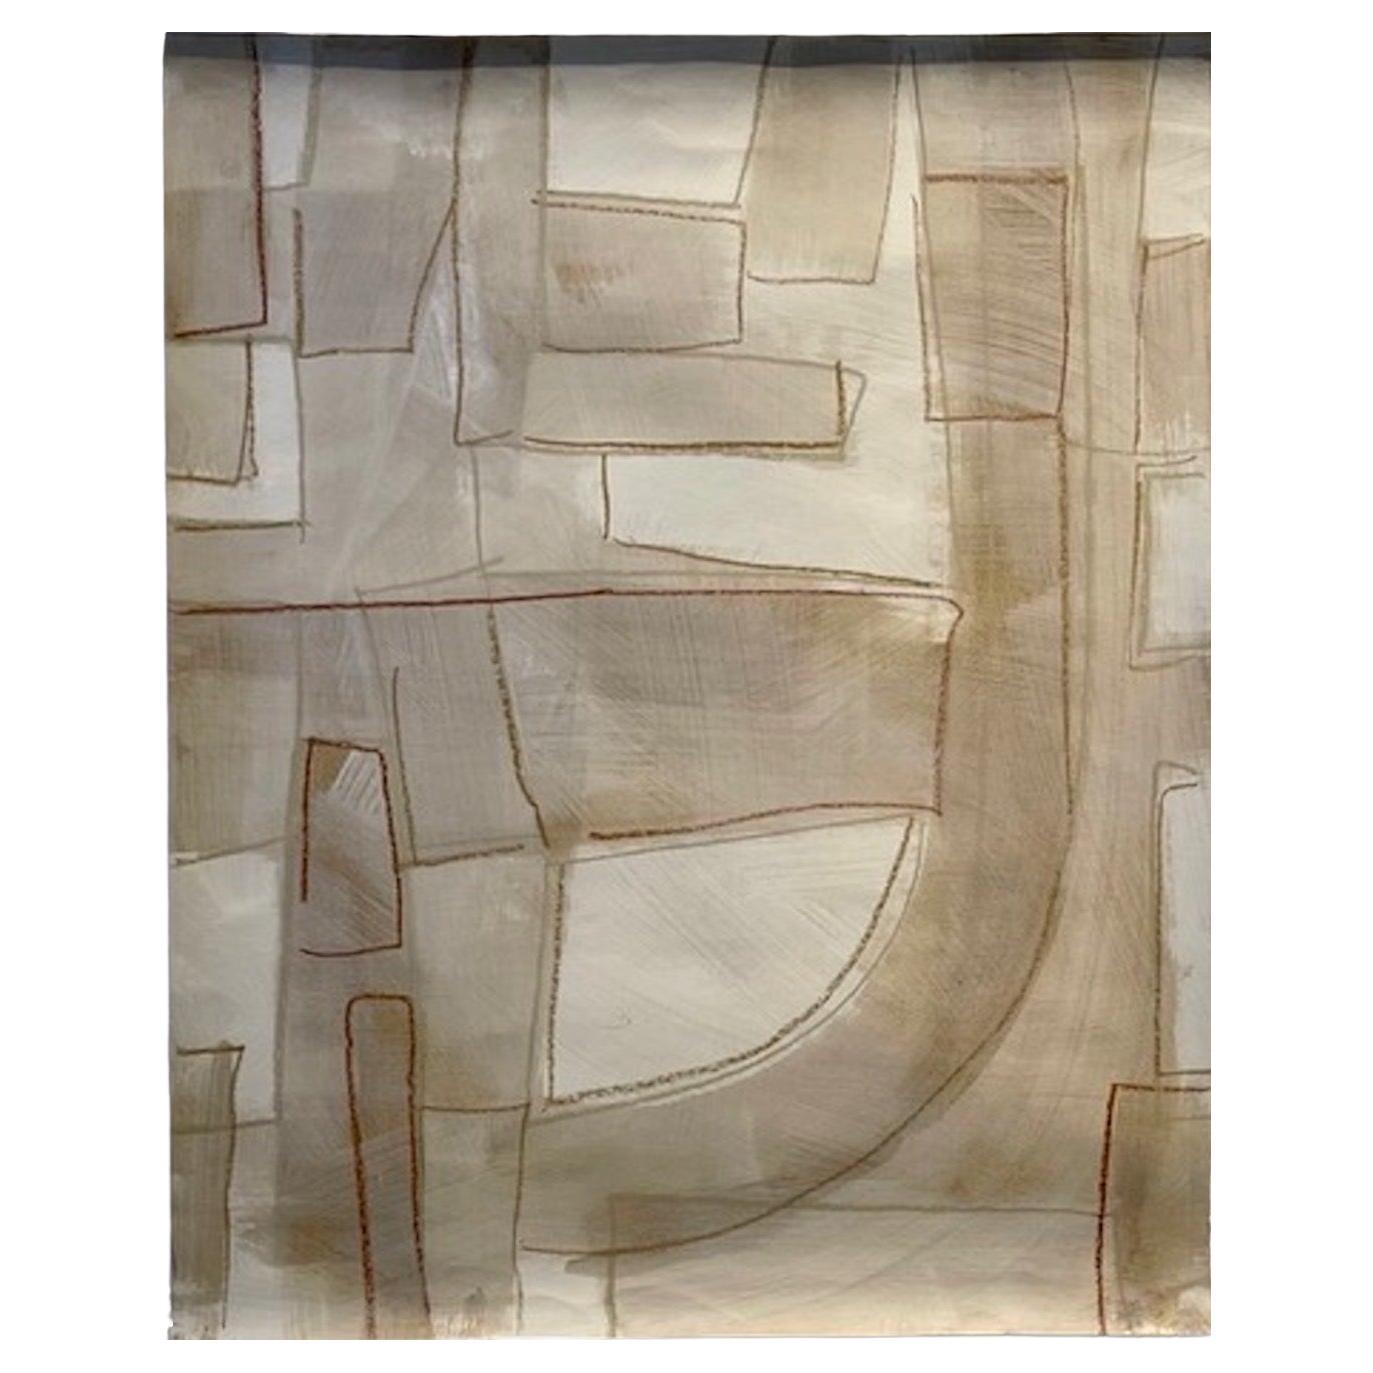 Untitled # 139 by Murray Duncan, mix media on paper, abstract, geometric, modern For Sale